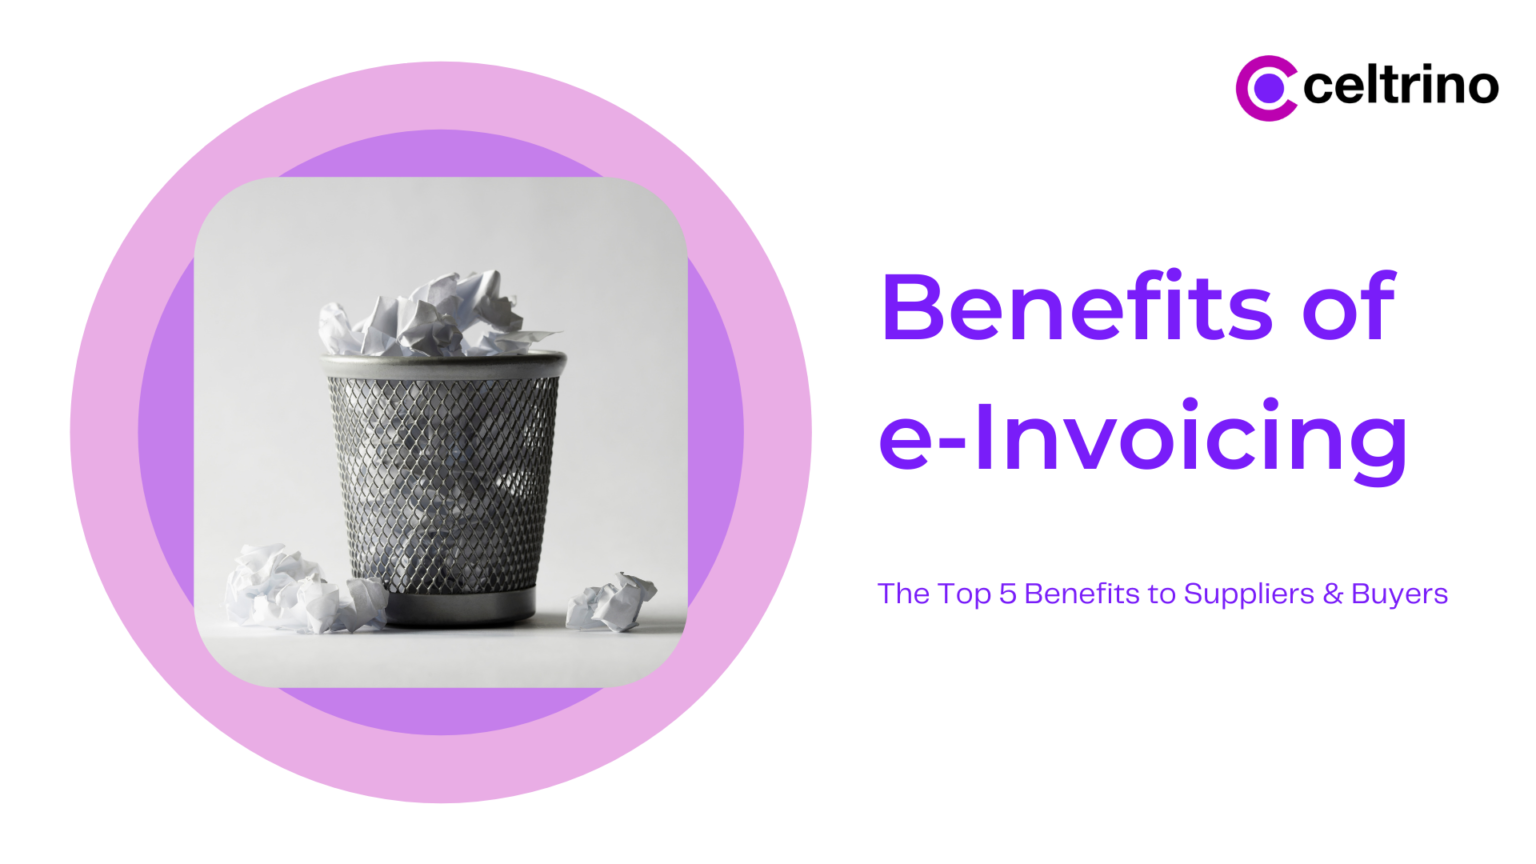 5 Benefits of e-Invoicing for Suppliers & Buyers